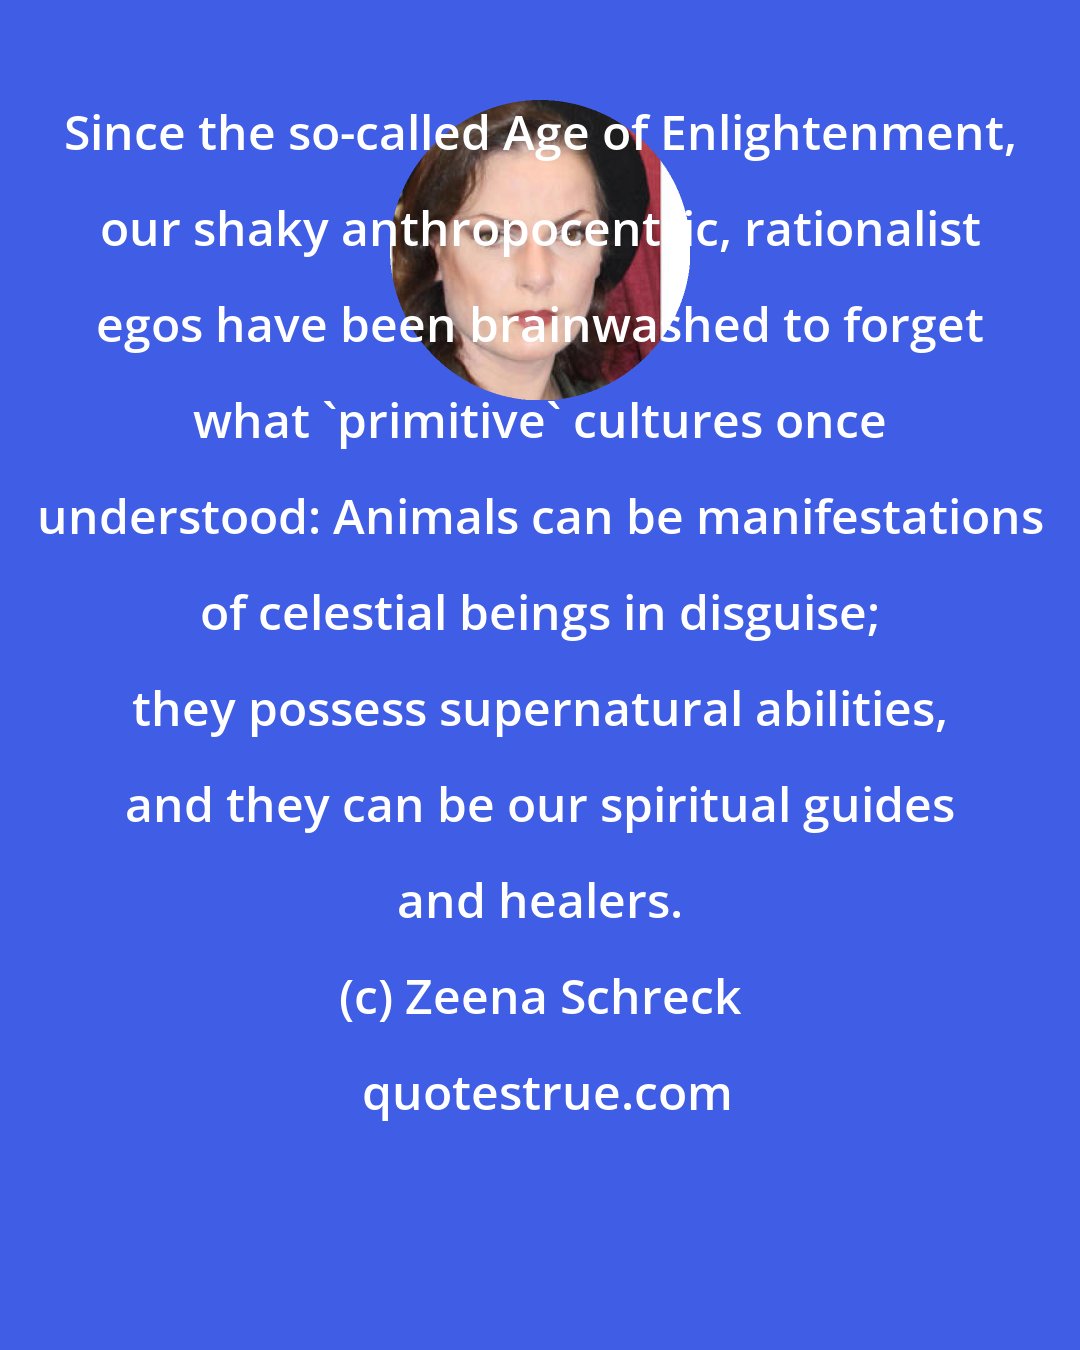 Zeena Schreck: Since the so-called Age of Enlightenment, our shaky anthropocentric, rationalist egos have been brainwashed to forget what 'primitive' cultures once understood: Animals can be manifestations of celestial beings in disguise; they possess supernatural abilities, and they can be our spiritual guides and healers.